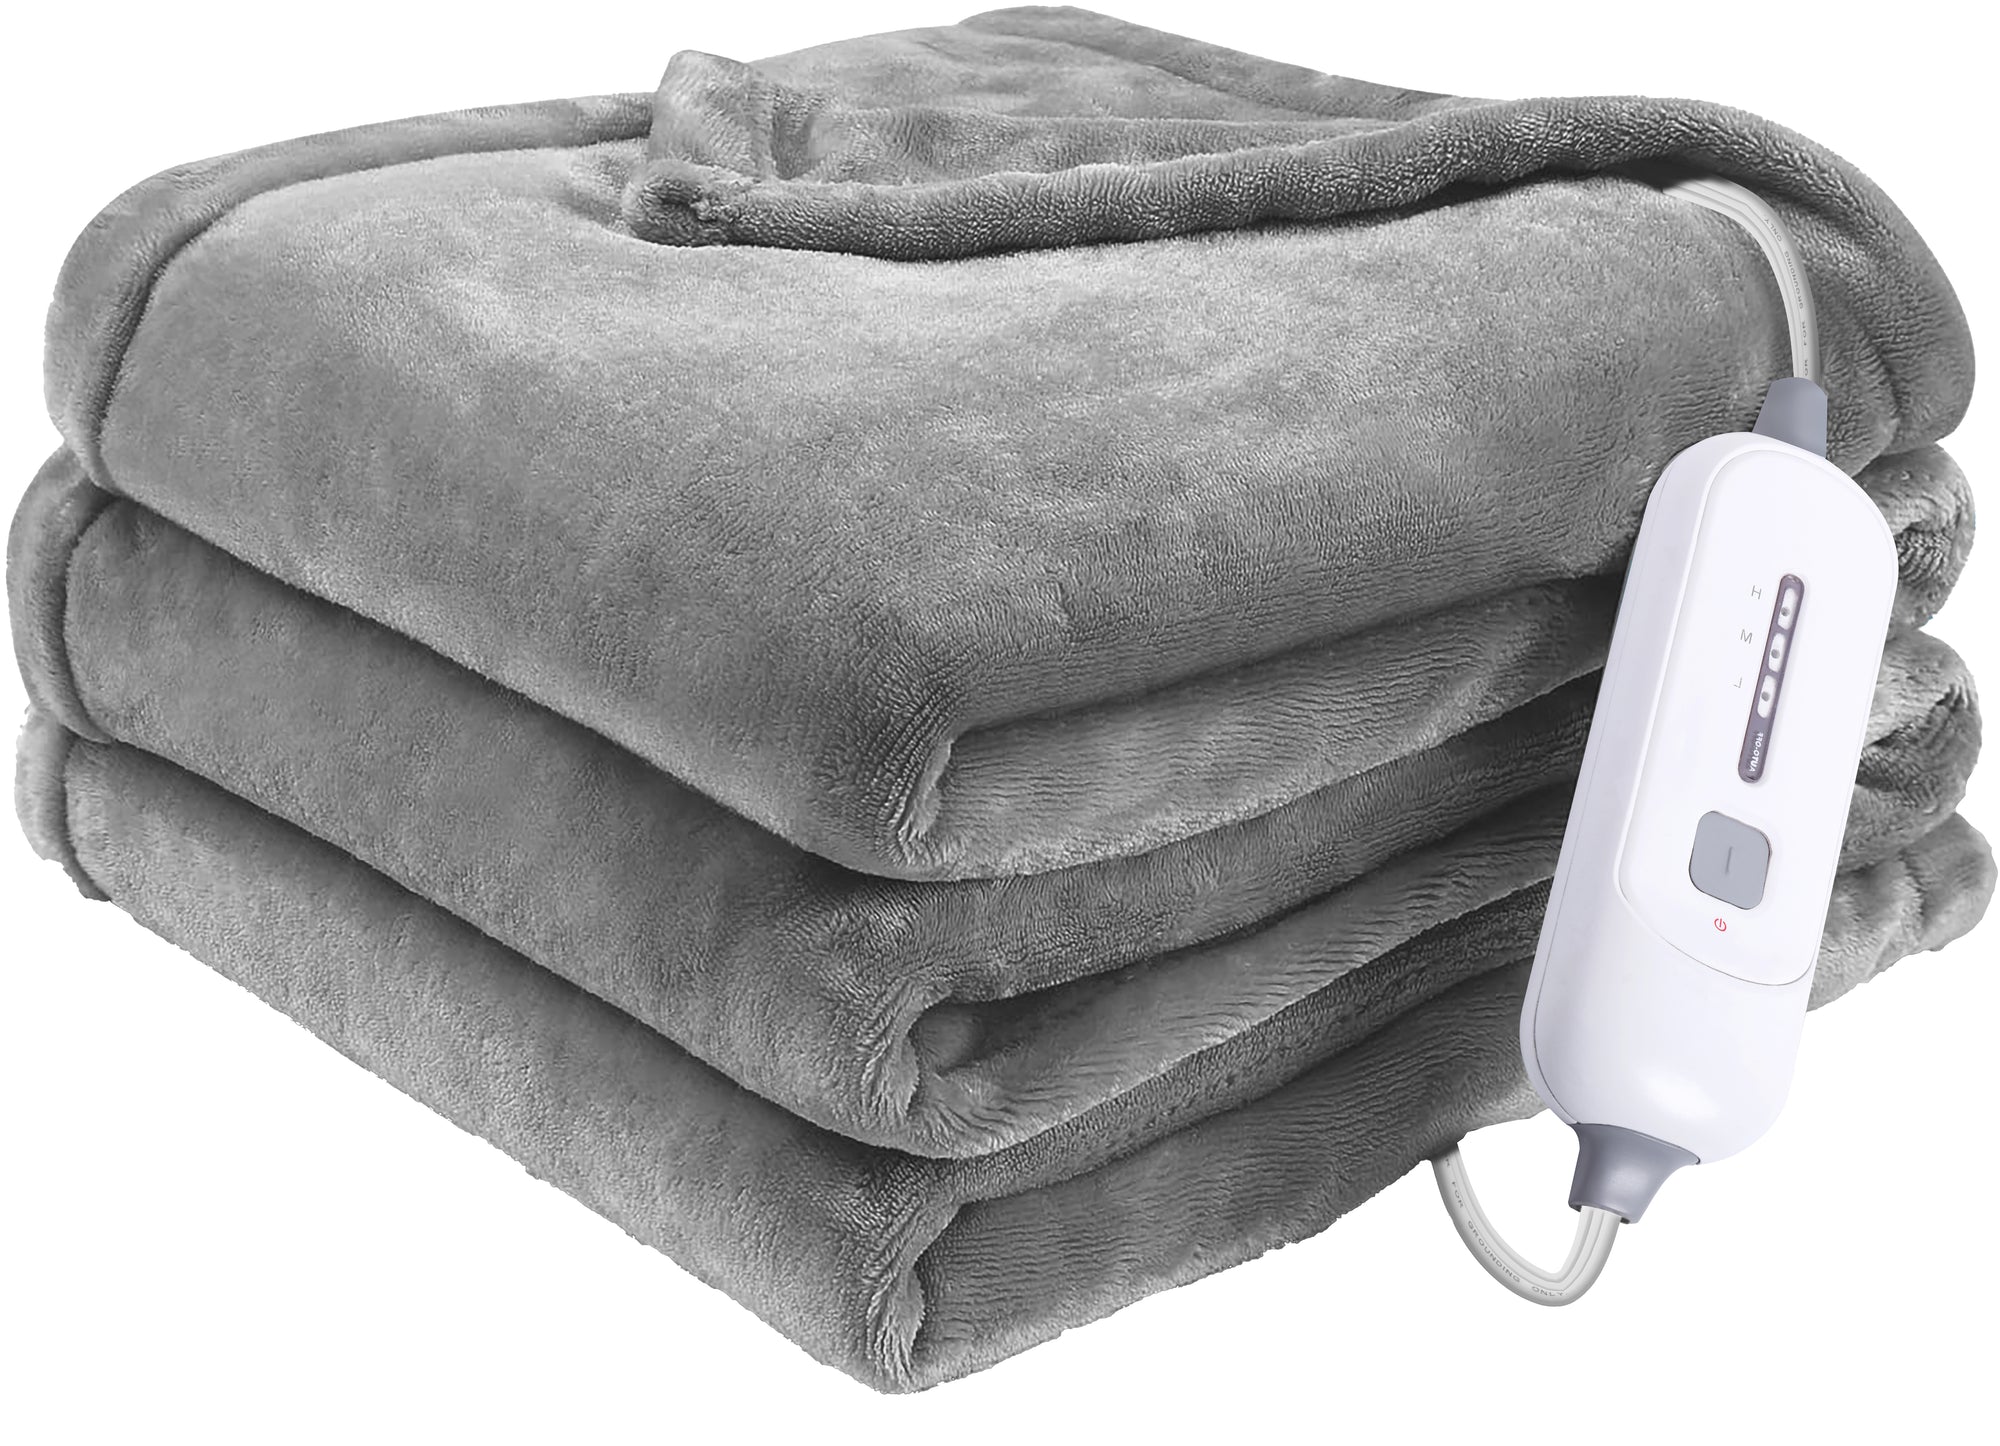 Shop Our Heated Blanket Gray 72"x84" On Amazon